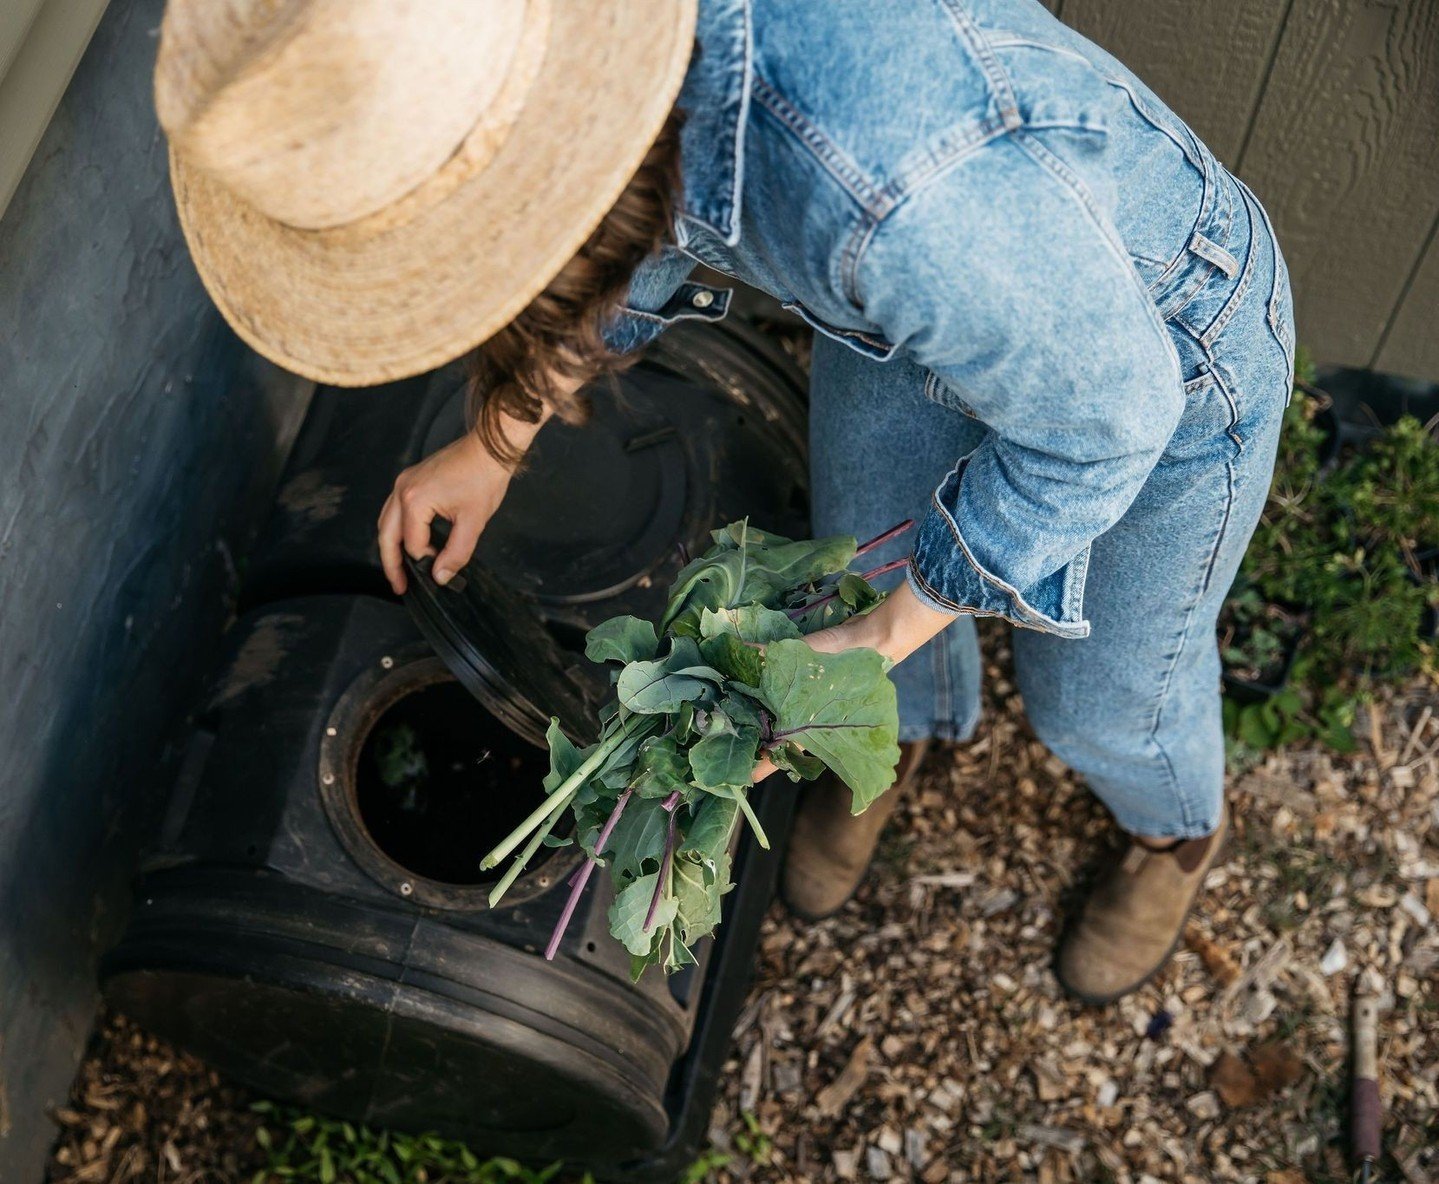 Compost tumblers are a necessary accessory in any kitchen garden! ⁠
Uneaten food takes up almost 25% of our nations landfills. In landfills, food gradually breaks down to form methane, a greenhouse gas that&rsquo;s up to 86 times more dangerous than 